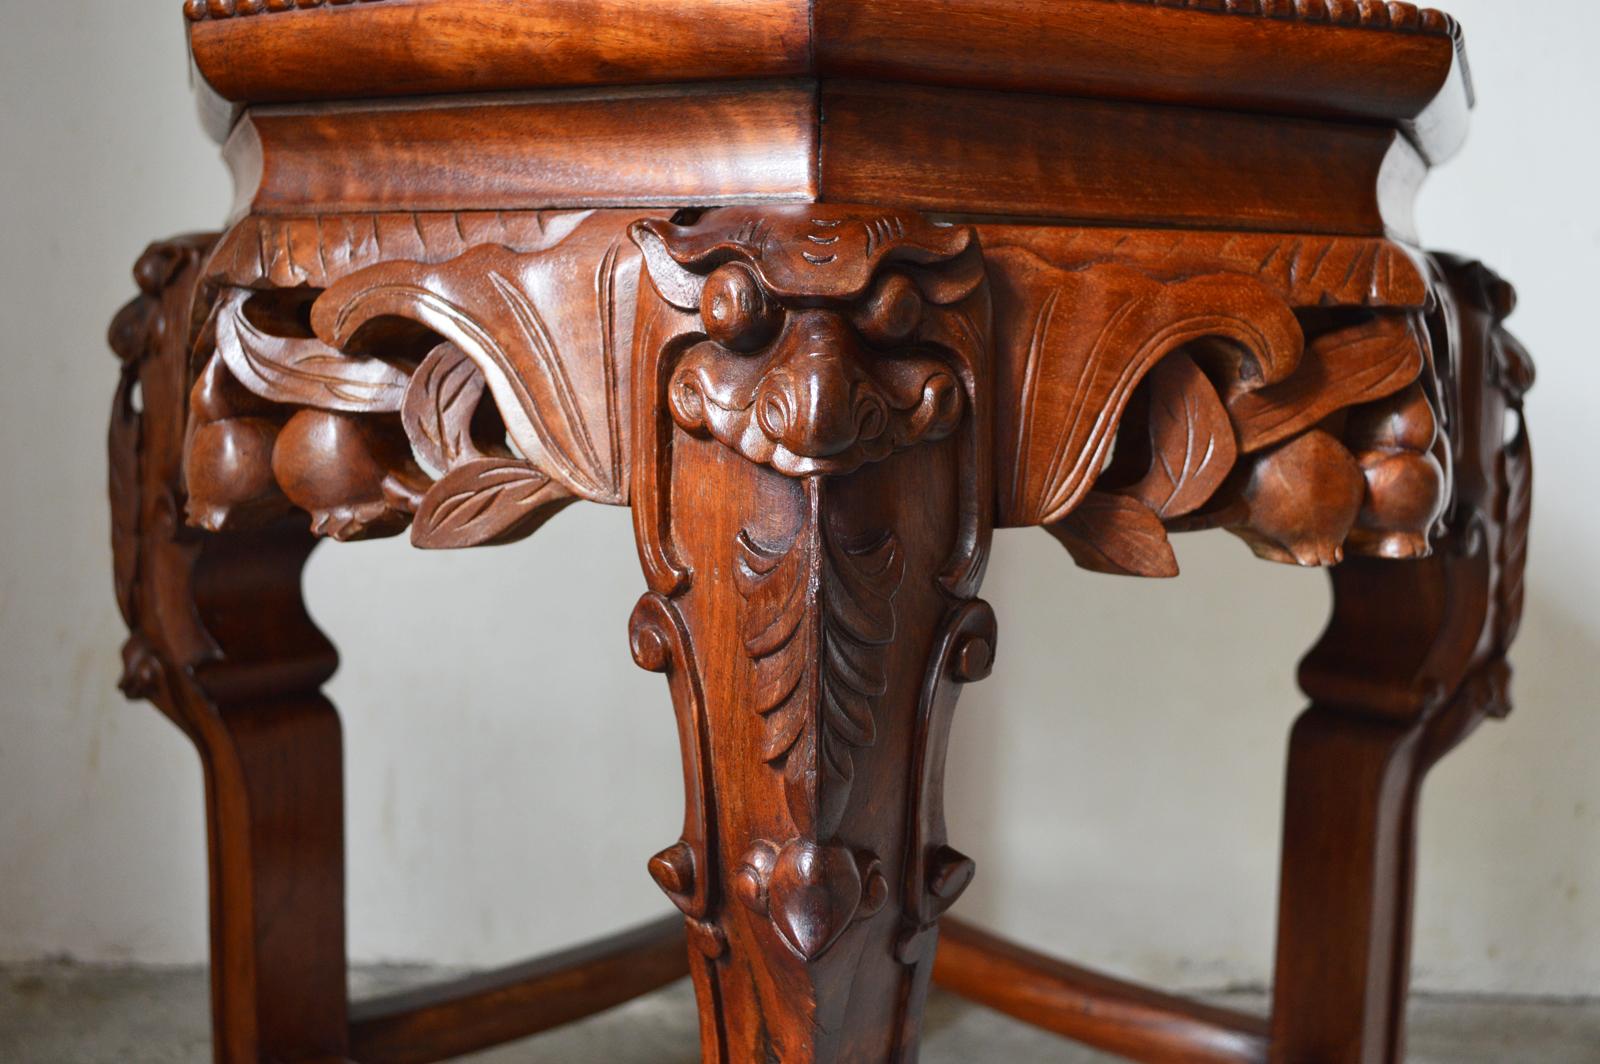 Japonisme Indochinese Low Table in Carved Wood, Dragons Theme, 1890s For Sale